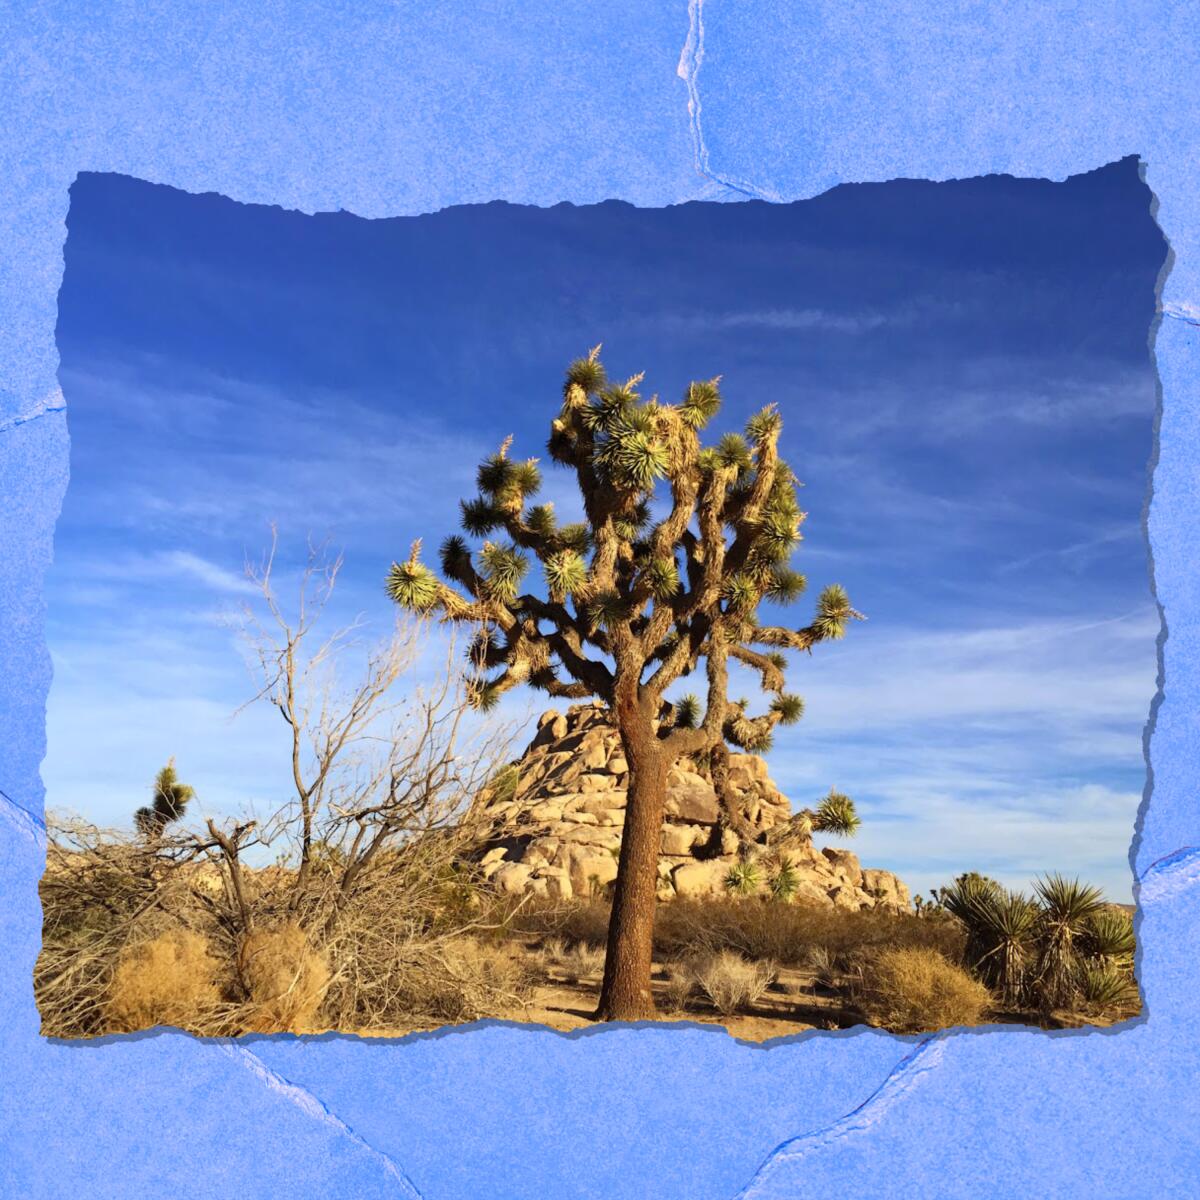 A Joshua tree stands amid a scrubby desert landscape with blue sky and wispy clouds in the background.